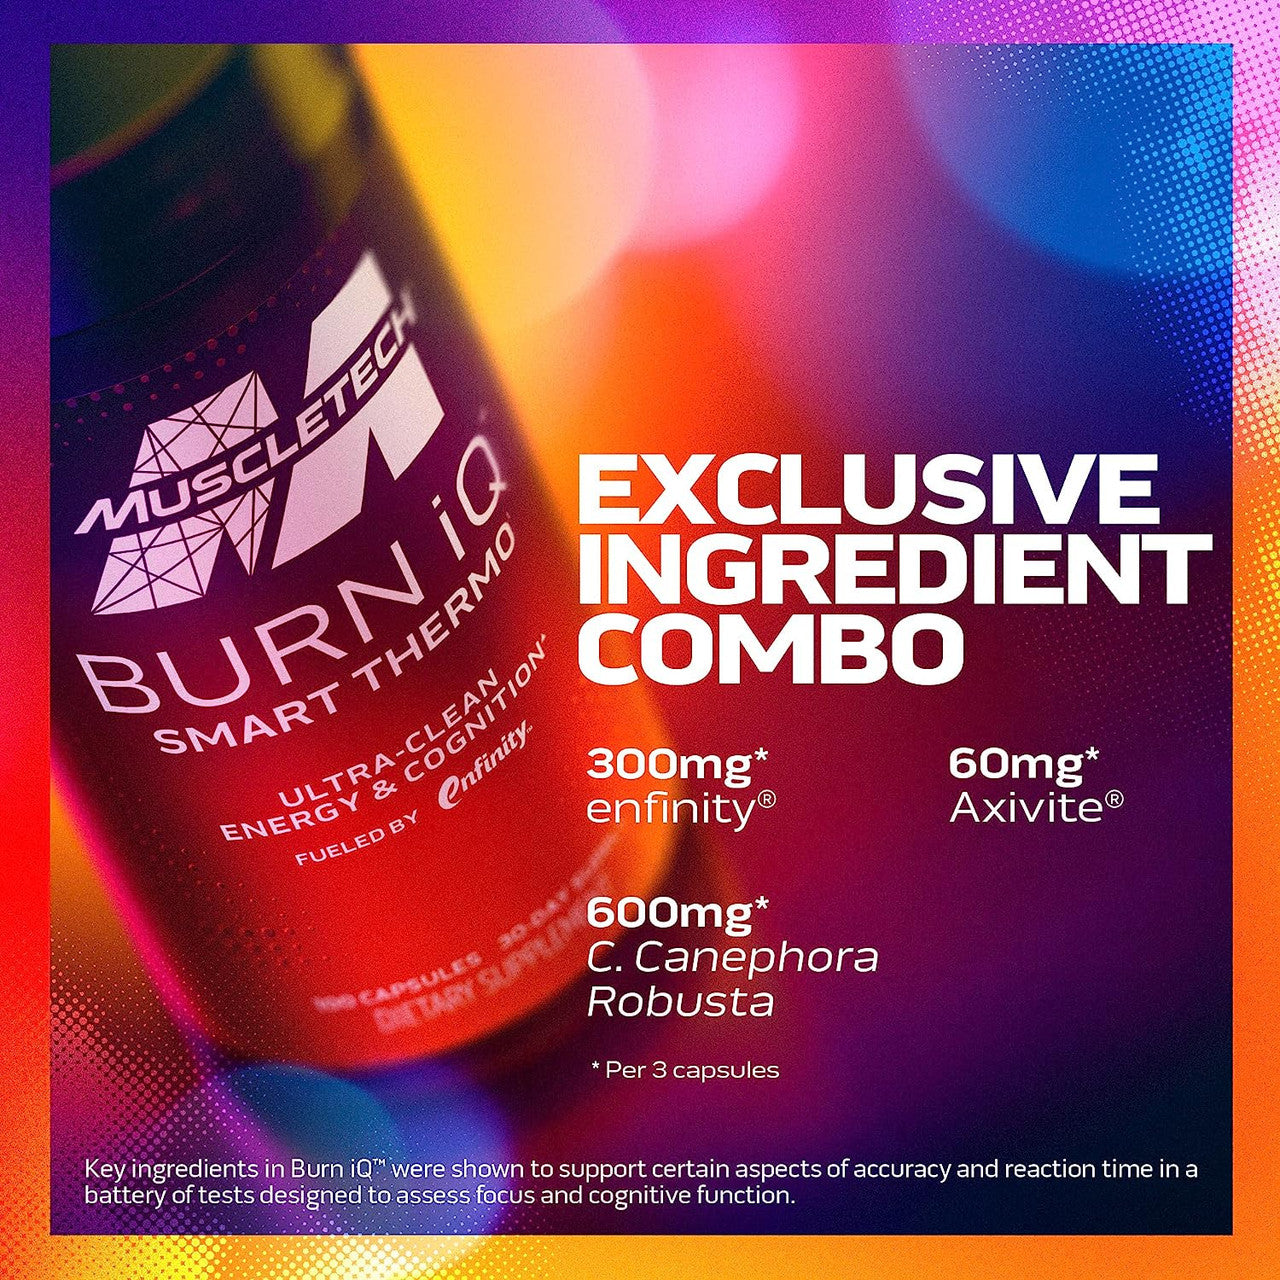 Muscletech Burn iQ exclsuive ingredient Combo